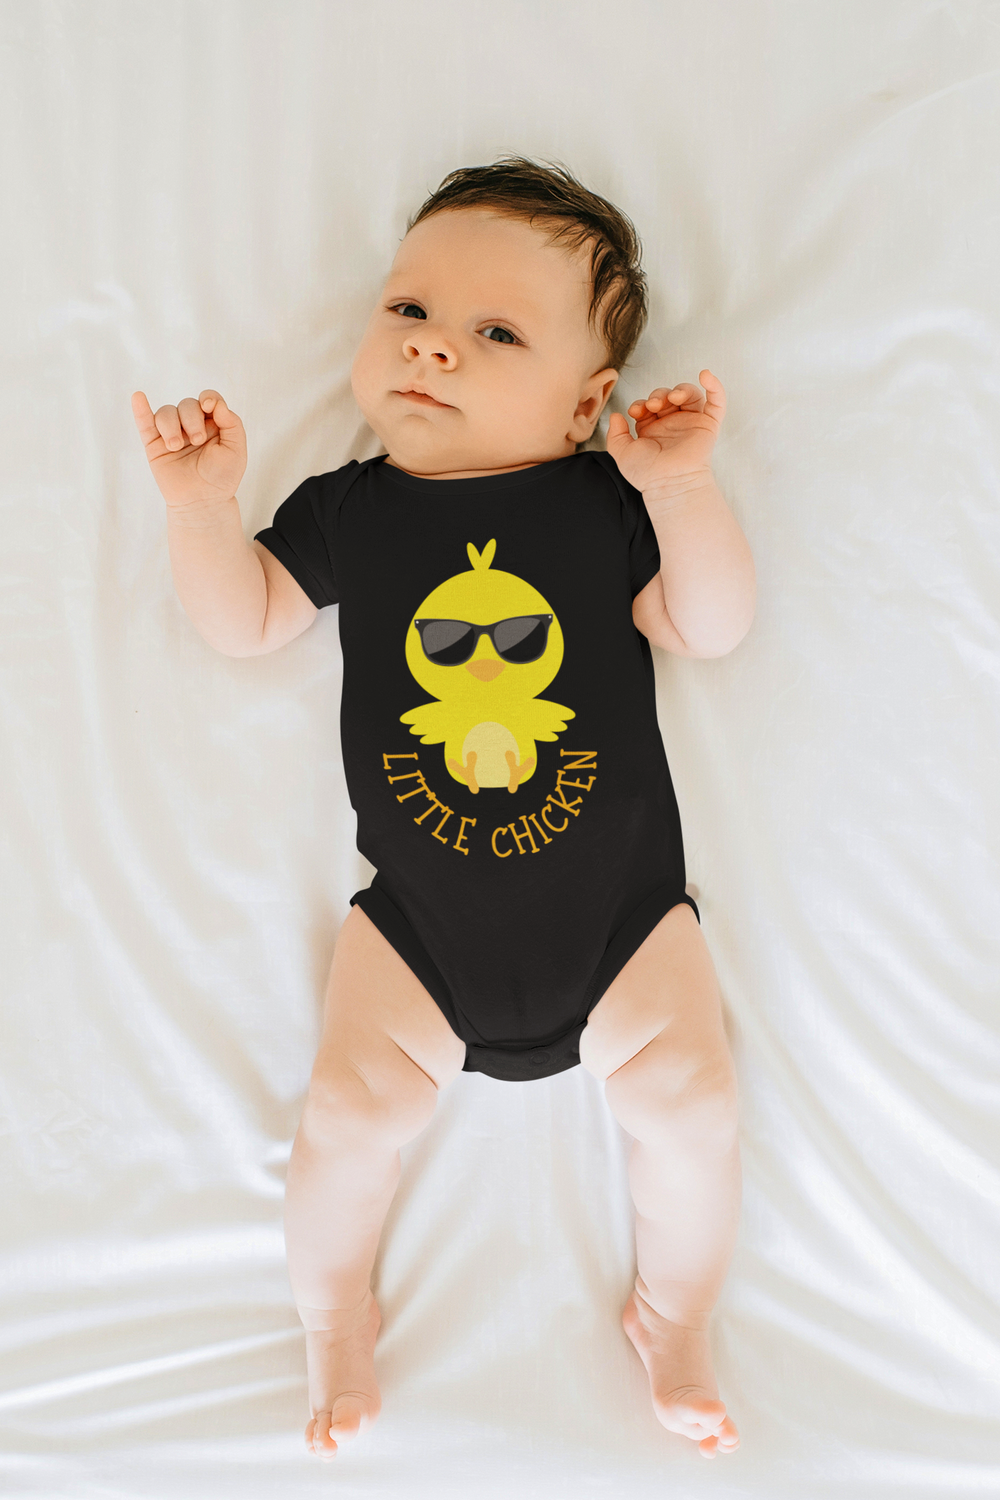 A Little Chicken Onesie for infants, featuring a baby in a black shirt with a yellow bird design. Made of soft ring-spun cotton, with lap shoulders for comfort and ease. Unisex fit, ideal for younglings.